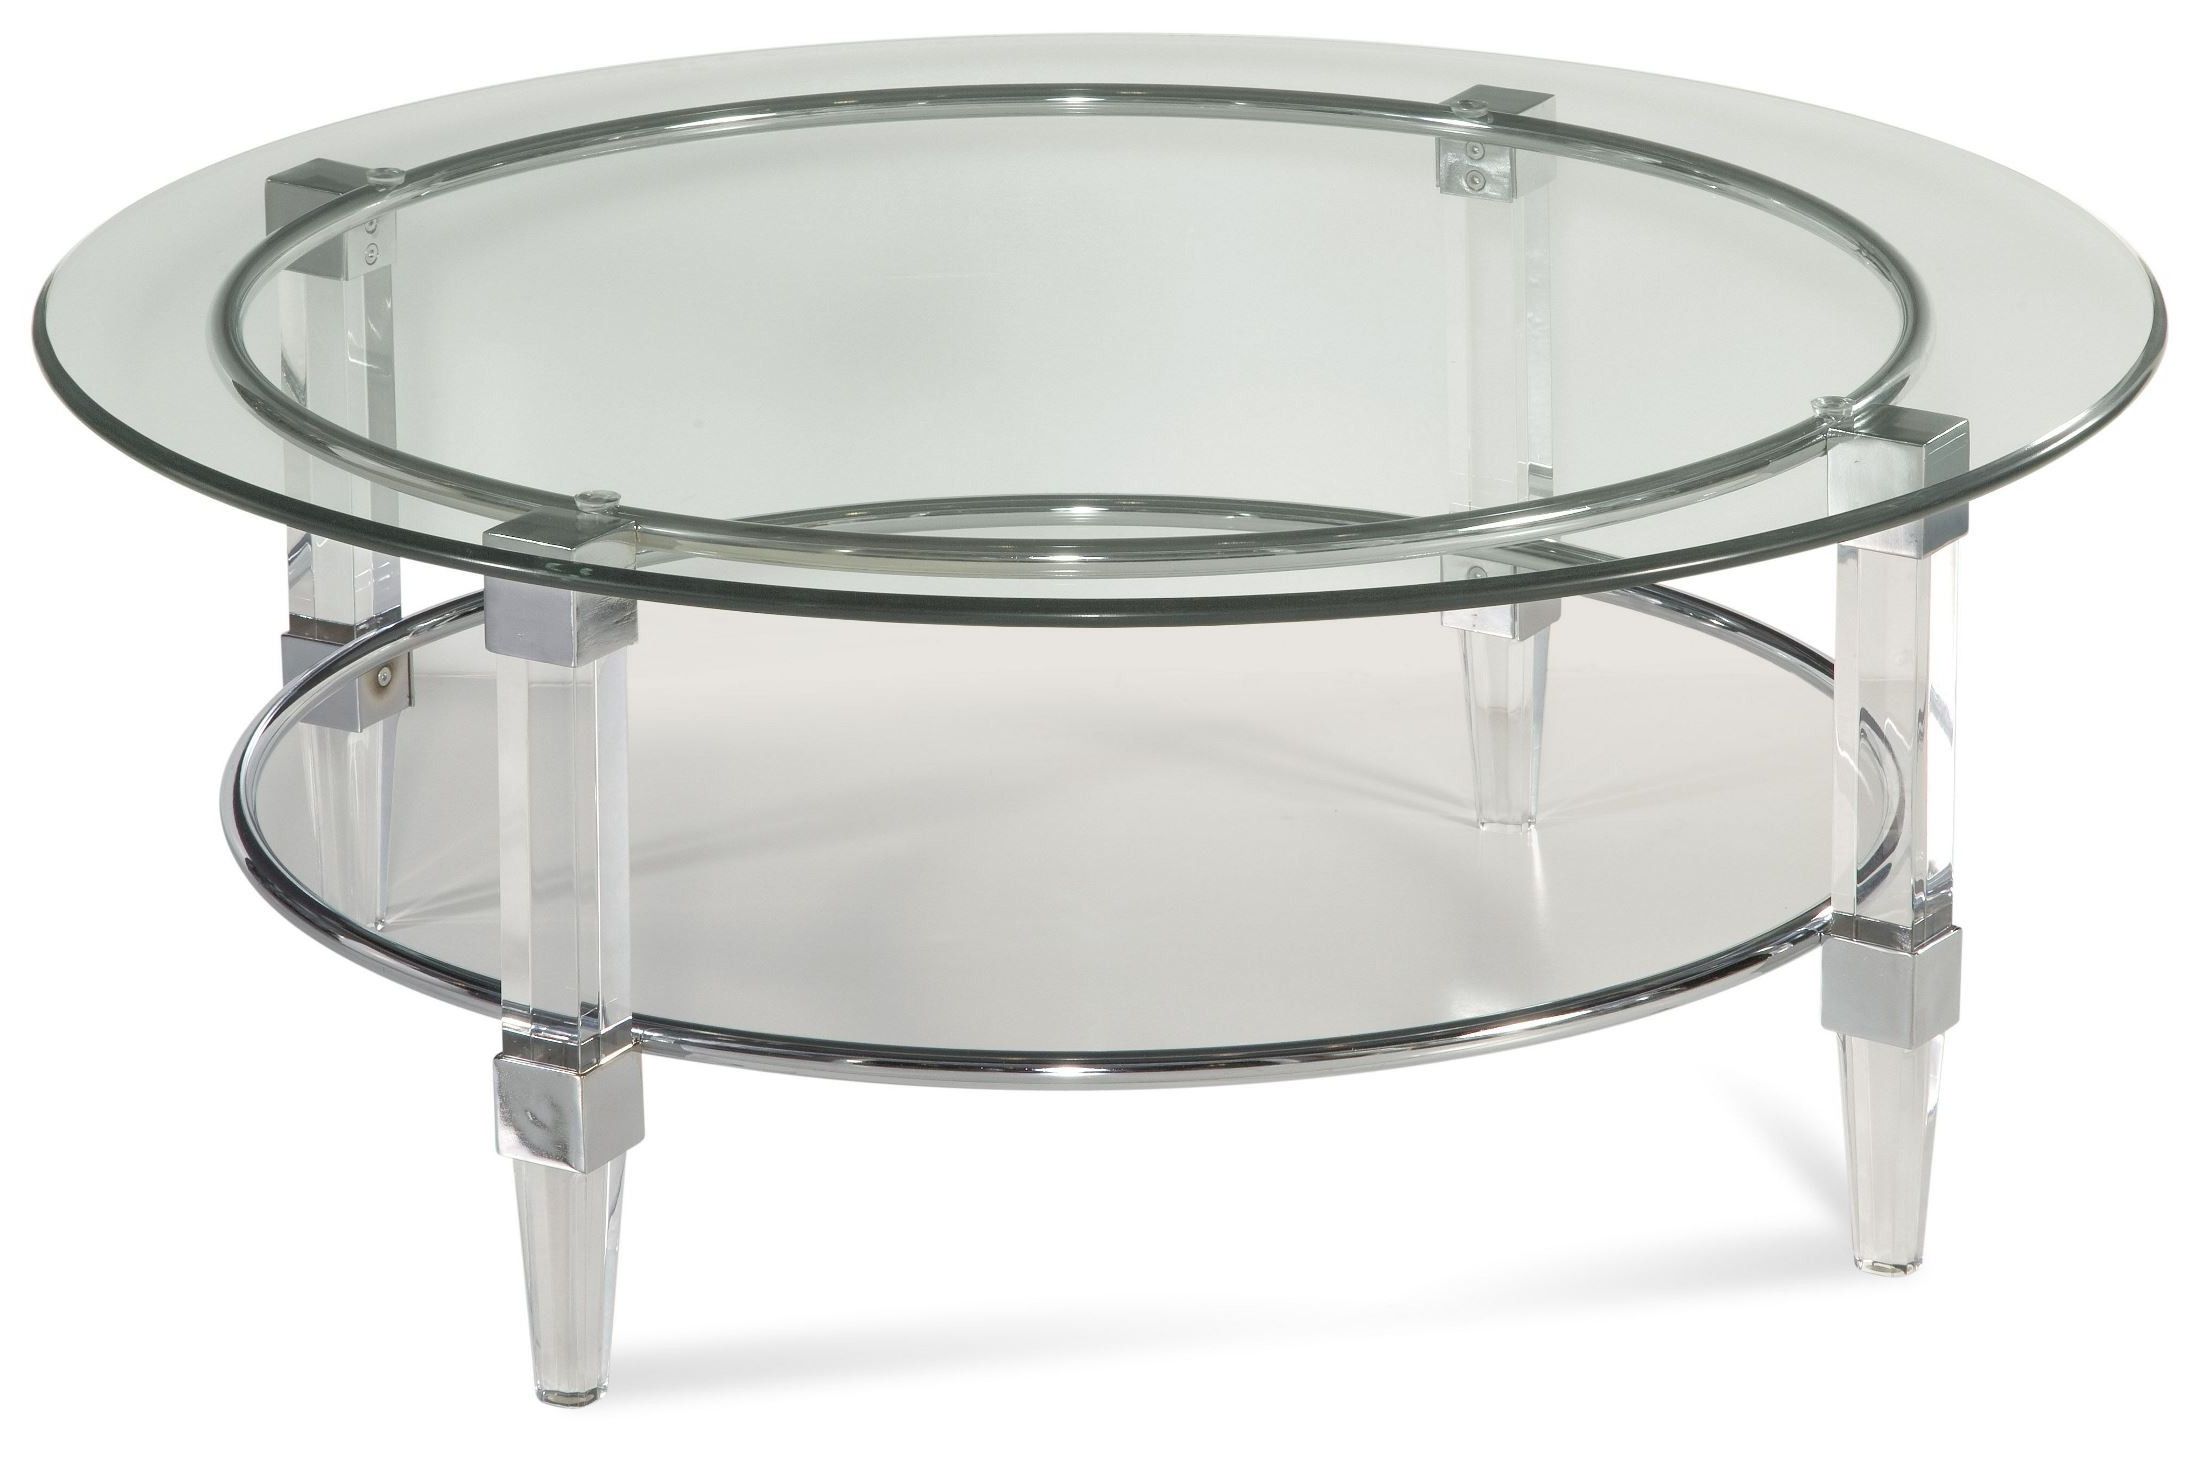 Cristal Acrylic And Chrome Cocktail Table, 2929 120ec Throughout Most Up To Date Glass And Chrome Cocktail Tables (View 9 of 20)